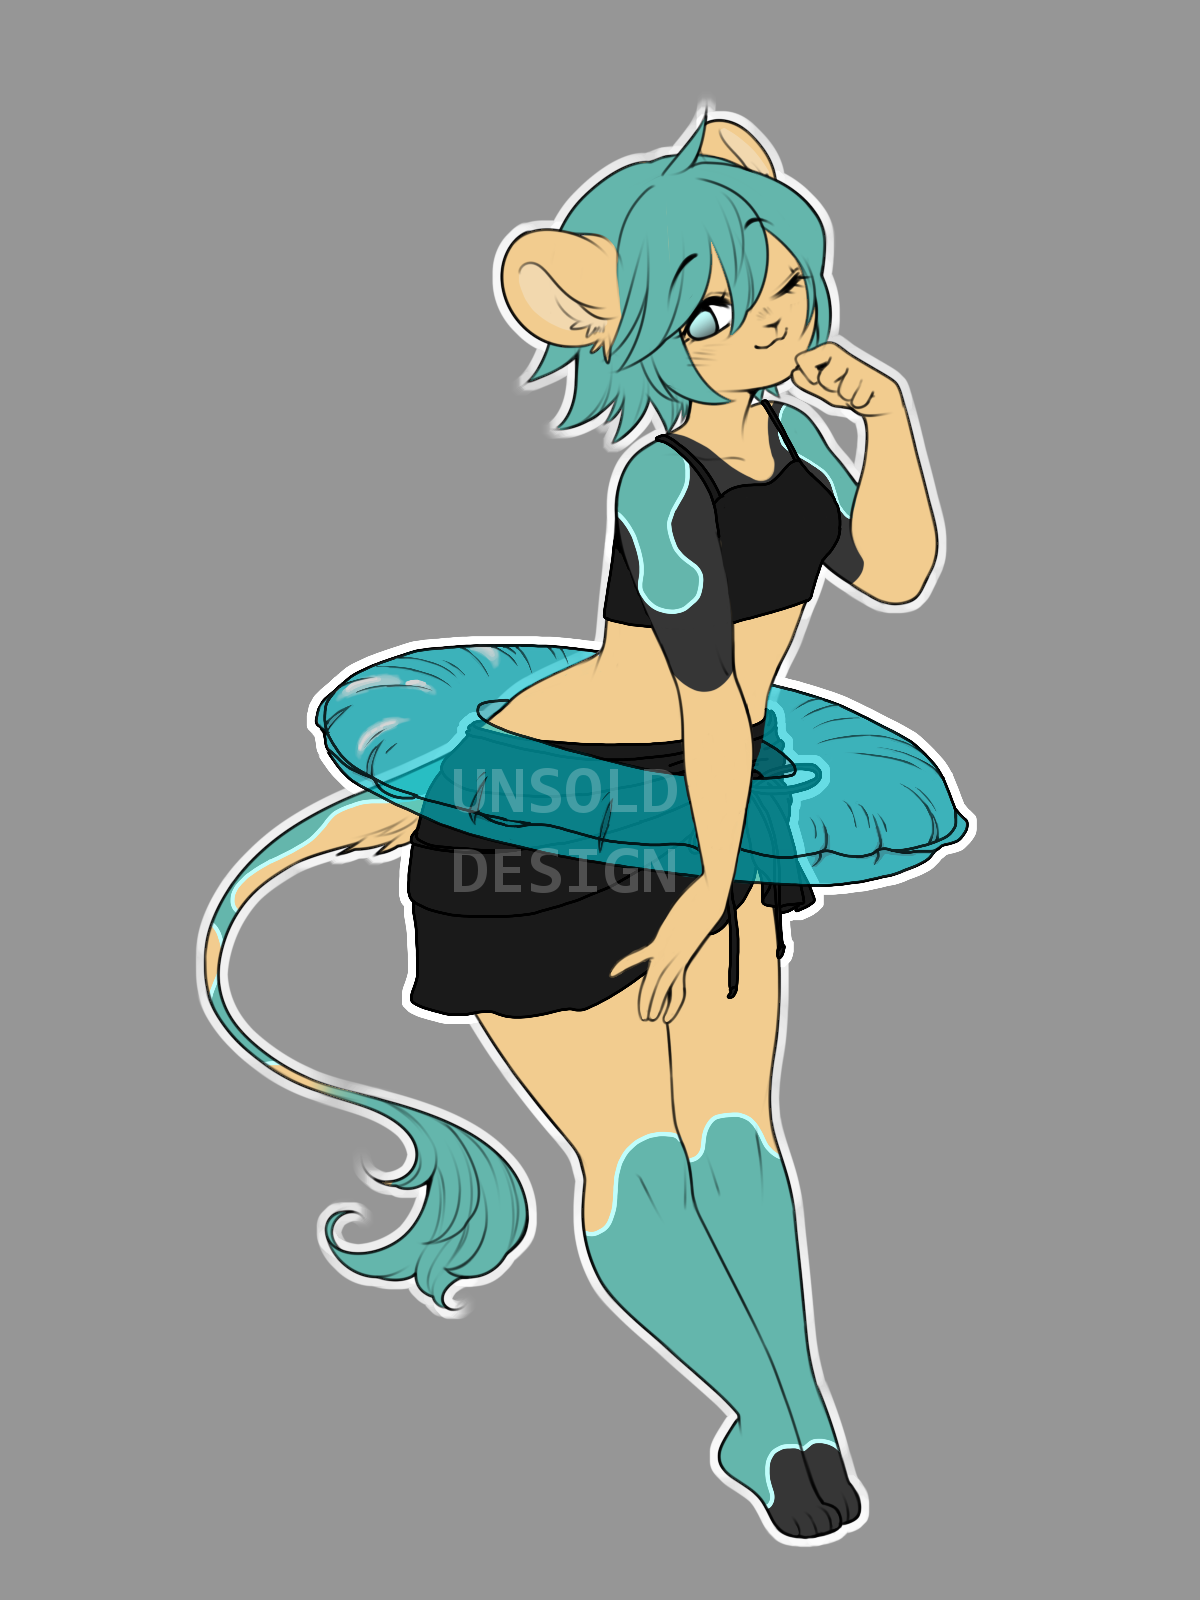 A female anthro lion. She is mostly tan, with simple pattern on her shoulders, tail, and from the knees down. She has short spiky hair that is turquoise. She is wearing a black two piece swimsuit and has a transparent blue innertube around her waist.